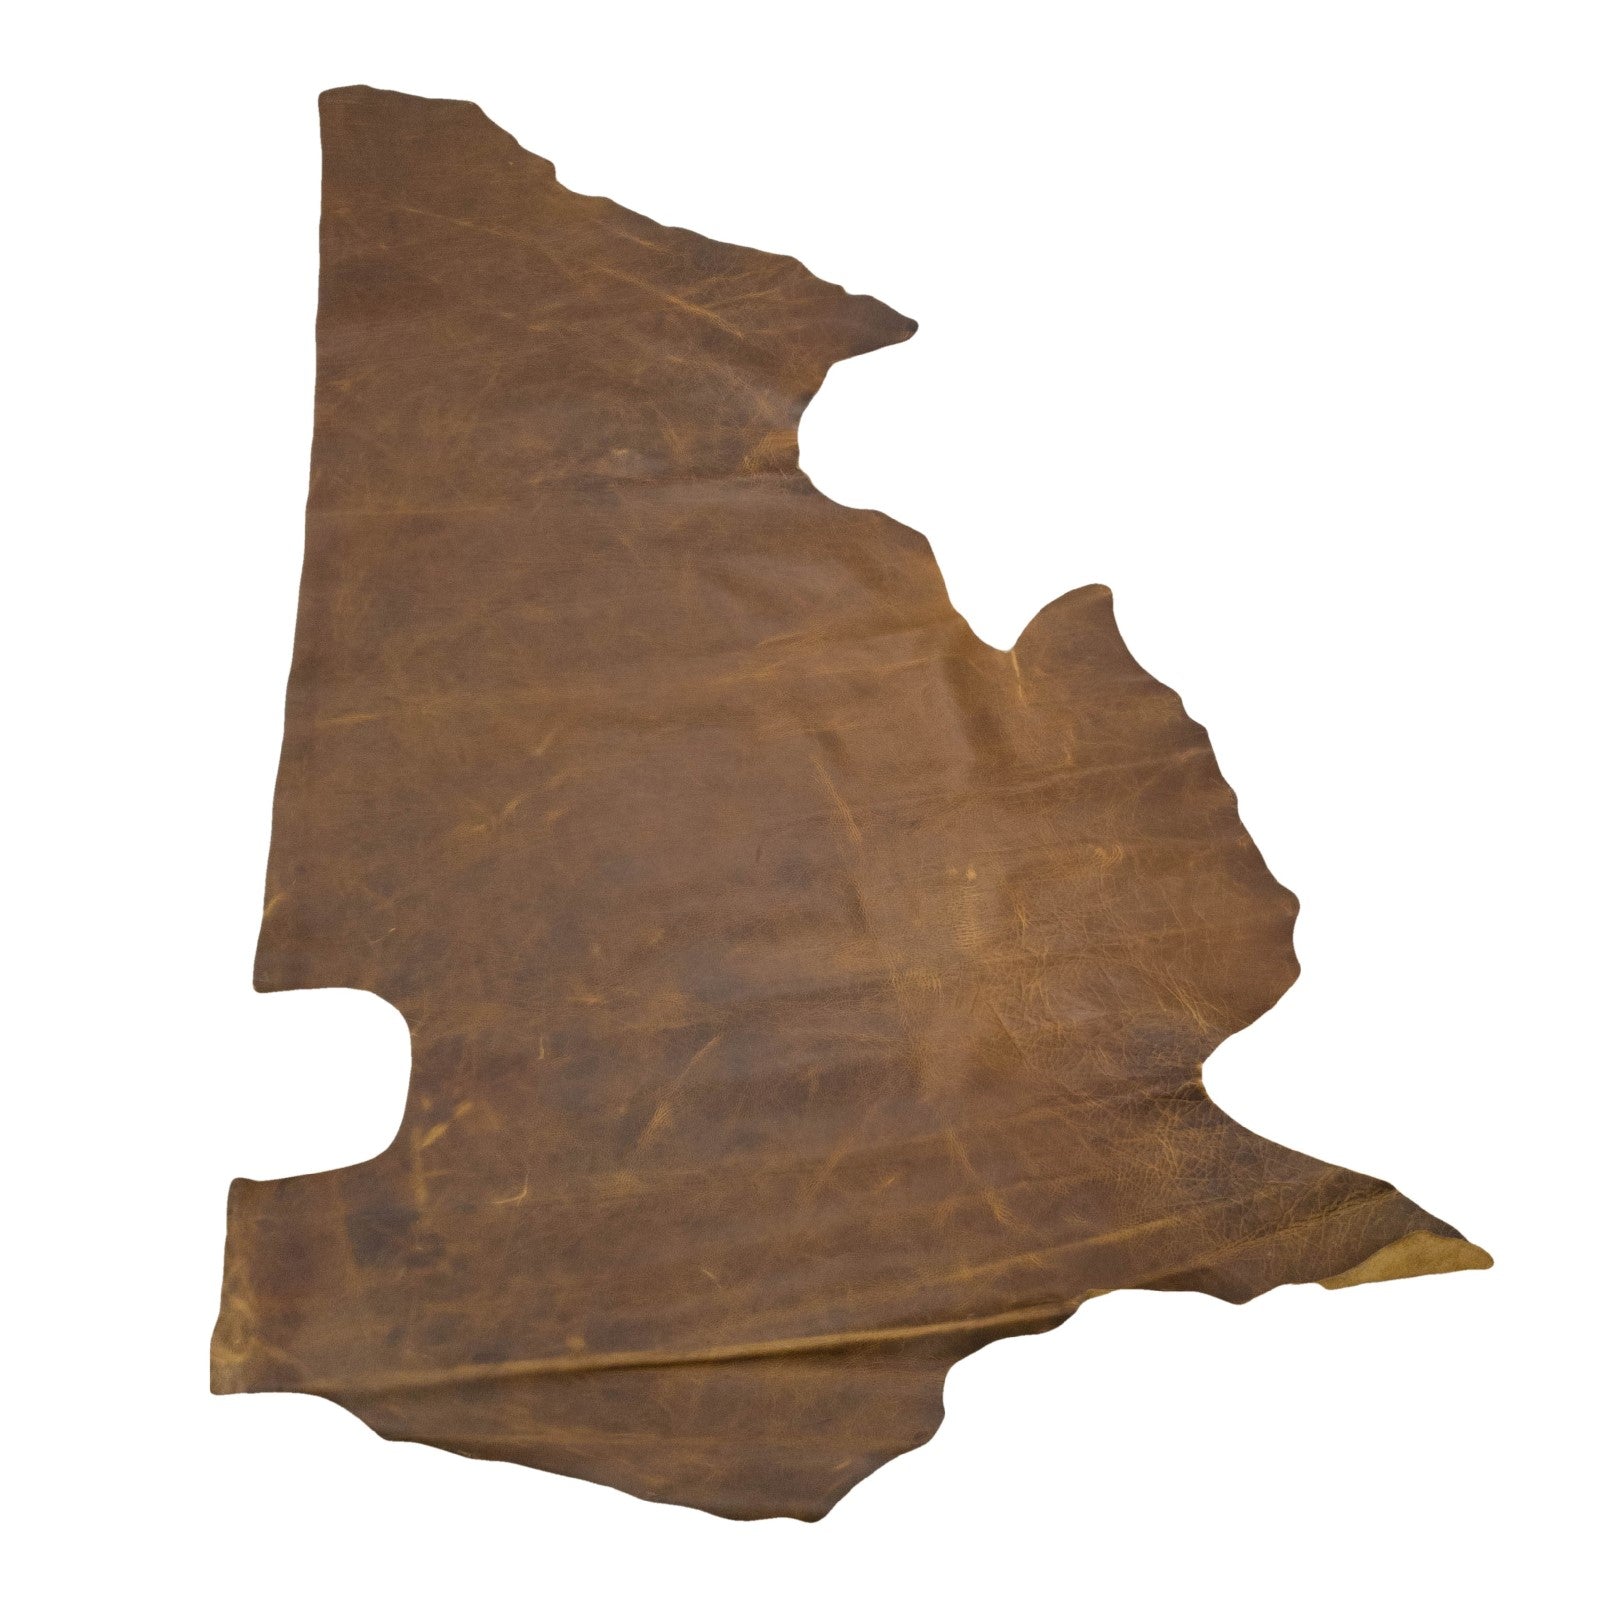 Tan, 4-5 oz, 18-29 Sq Ft, Chap Cow Side, 18-20 / Low Grade | The Leather Guy